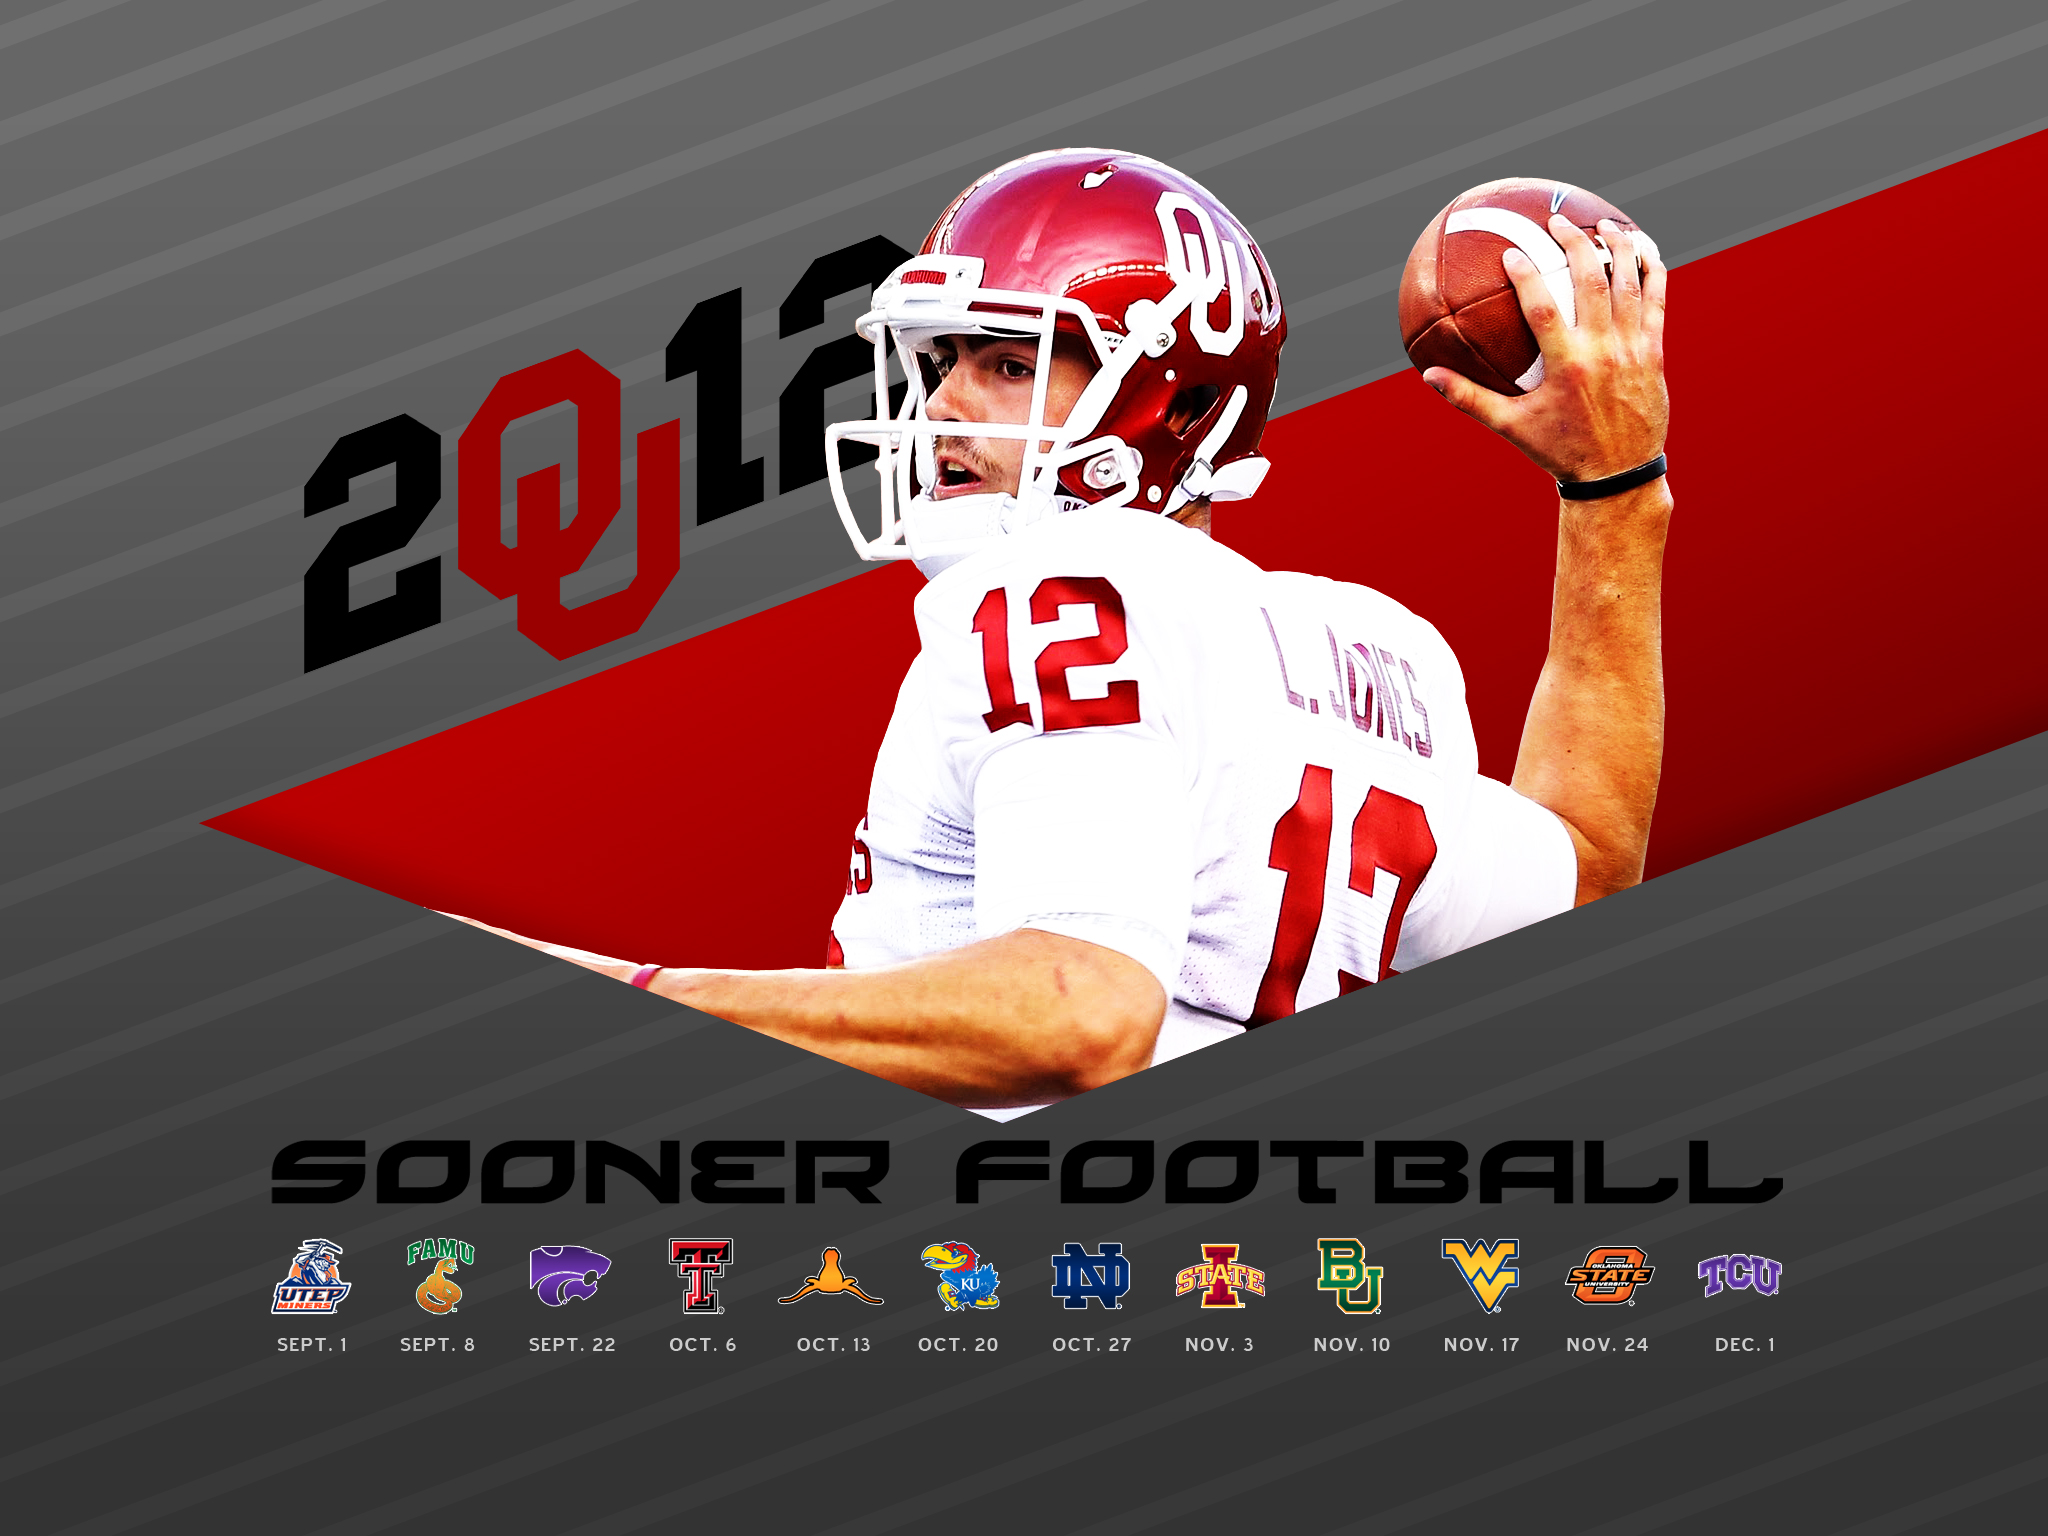 2012 OU Football Schedule Wallpaper for iPhone iPad 2048x1536